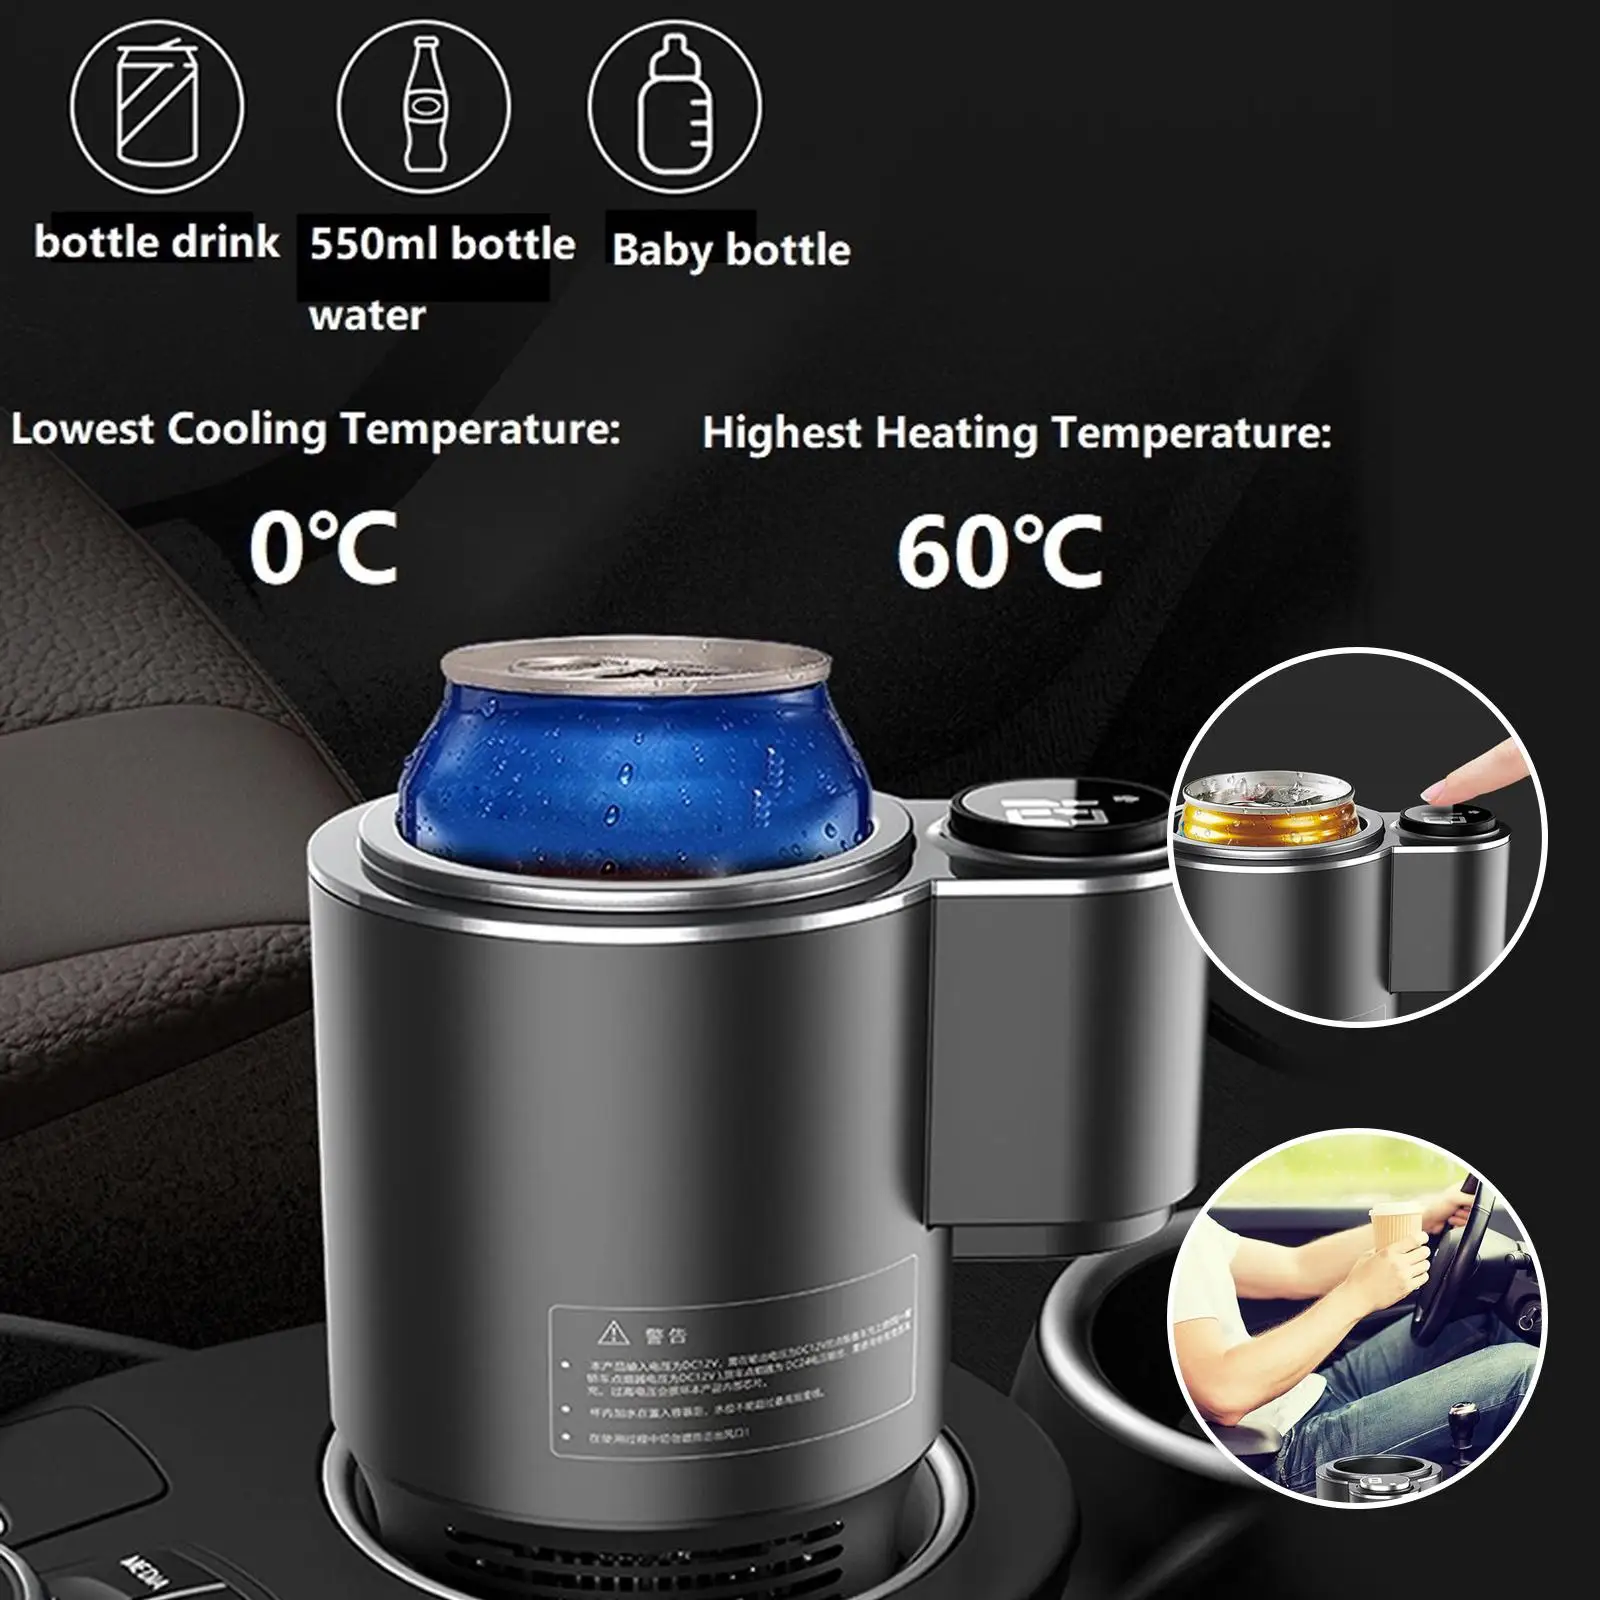 

Car Heating Cooling Cup for Can Beverage Coffee Warmer Auto Drink Cold and Hot Mug F7S6